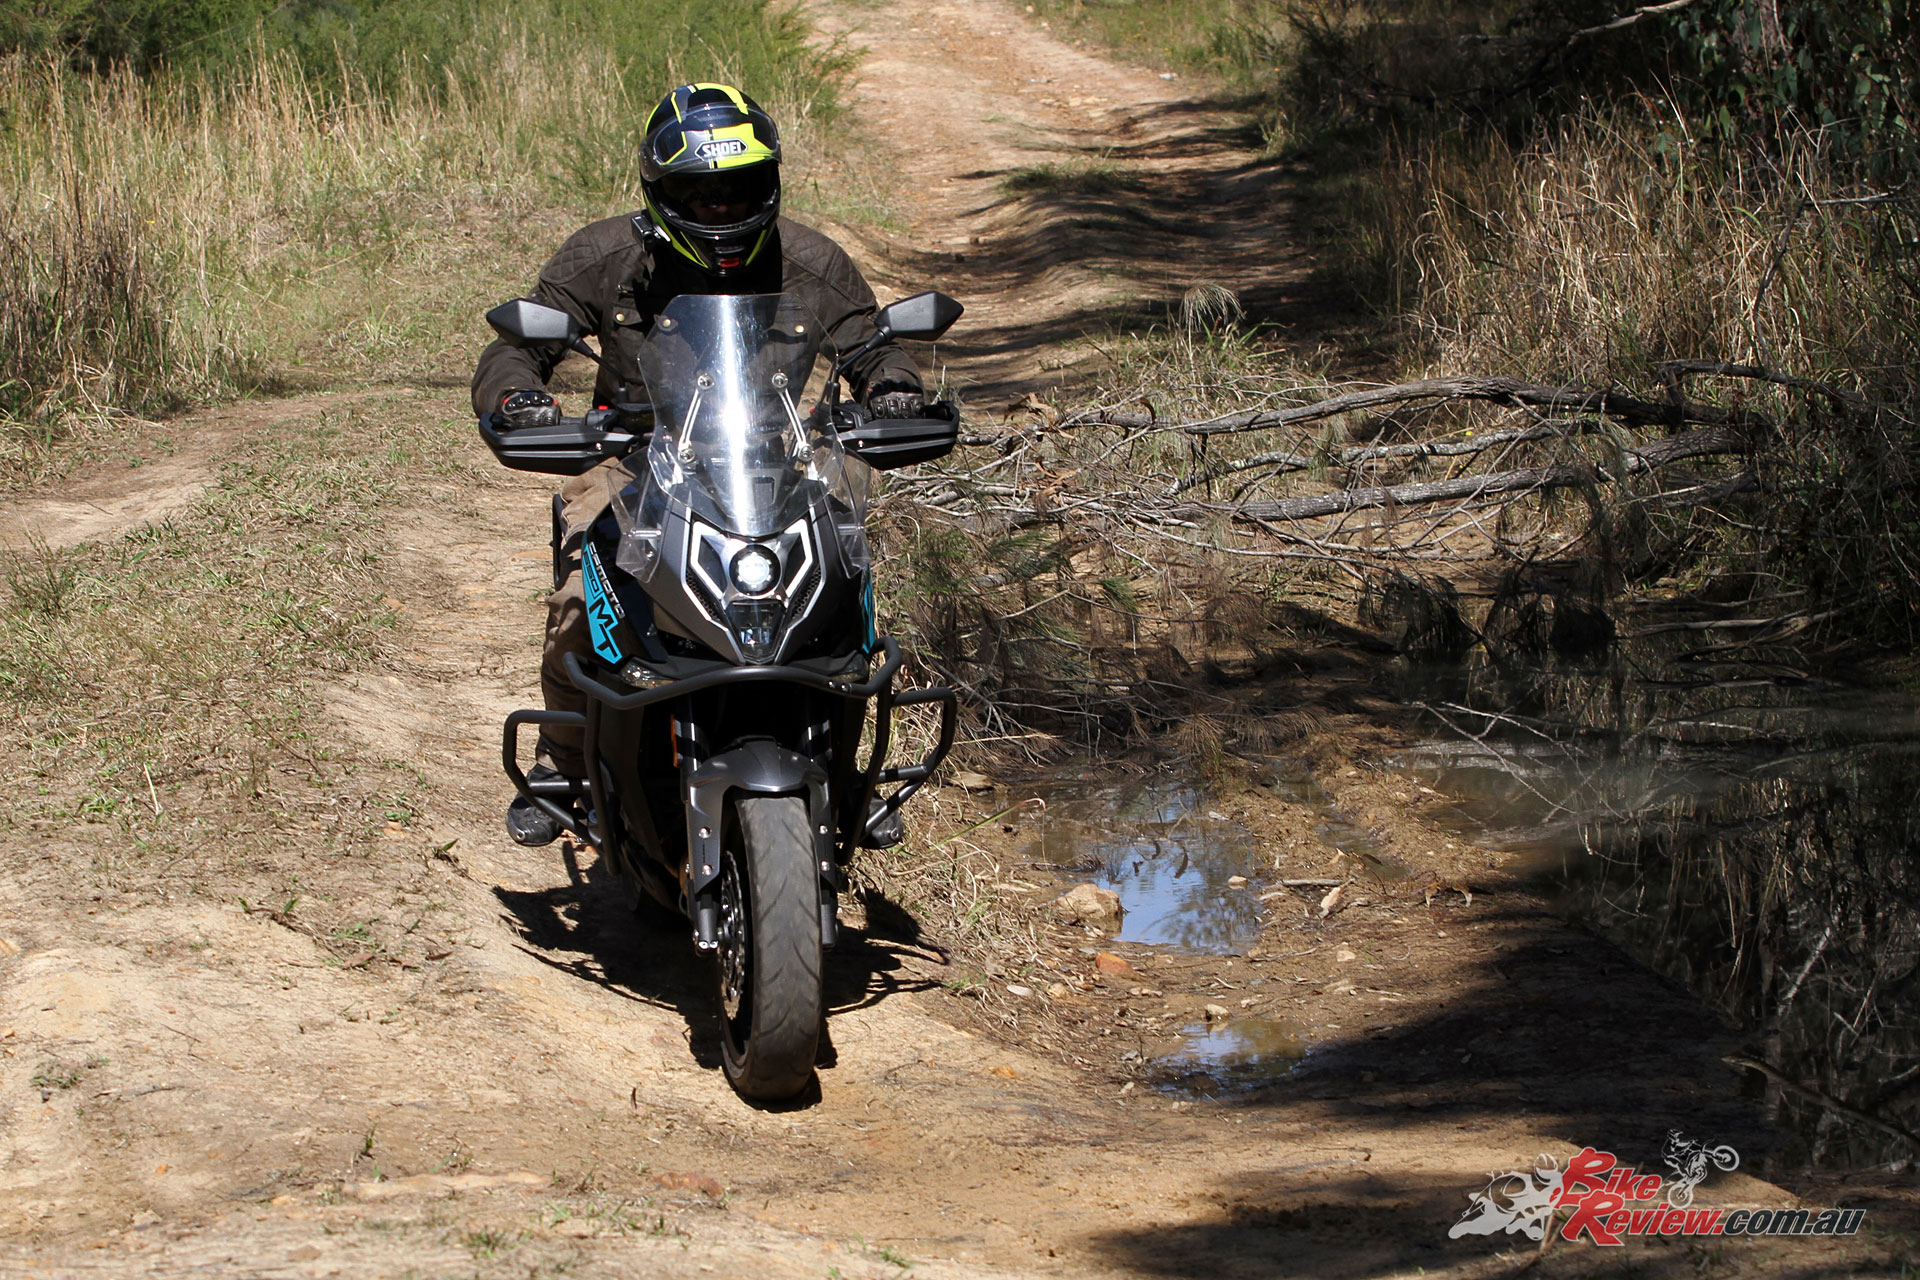 Despite road rubber the 650MT is also capable of the light adventure duties, especially with the crash bars